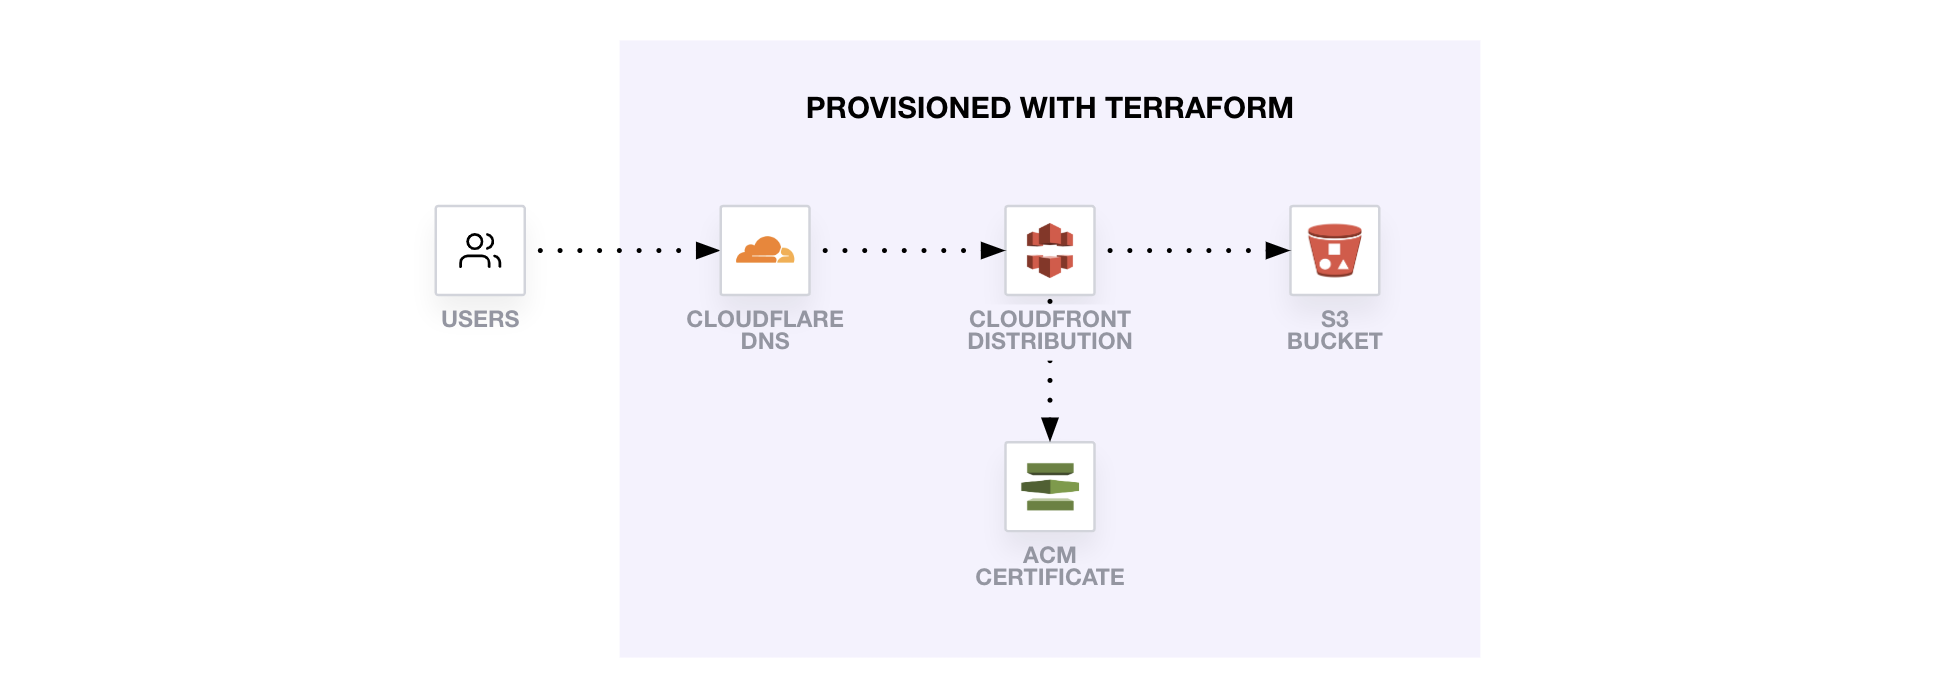 This diagram shows how users interact with CloudFlare, CloudFront, the ACM certificate and S3 bucket